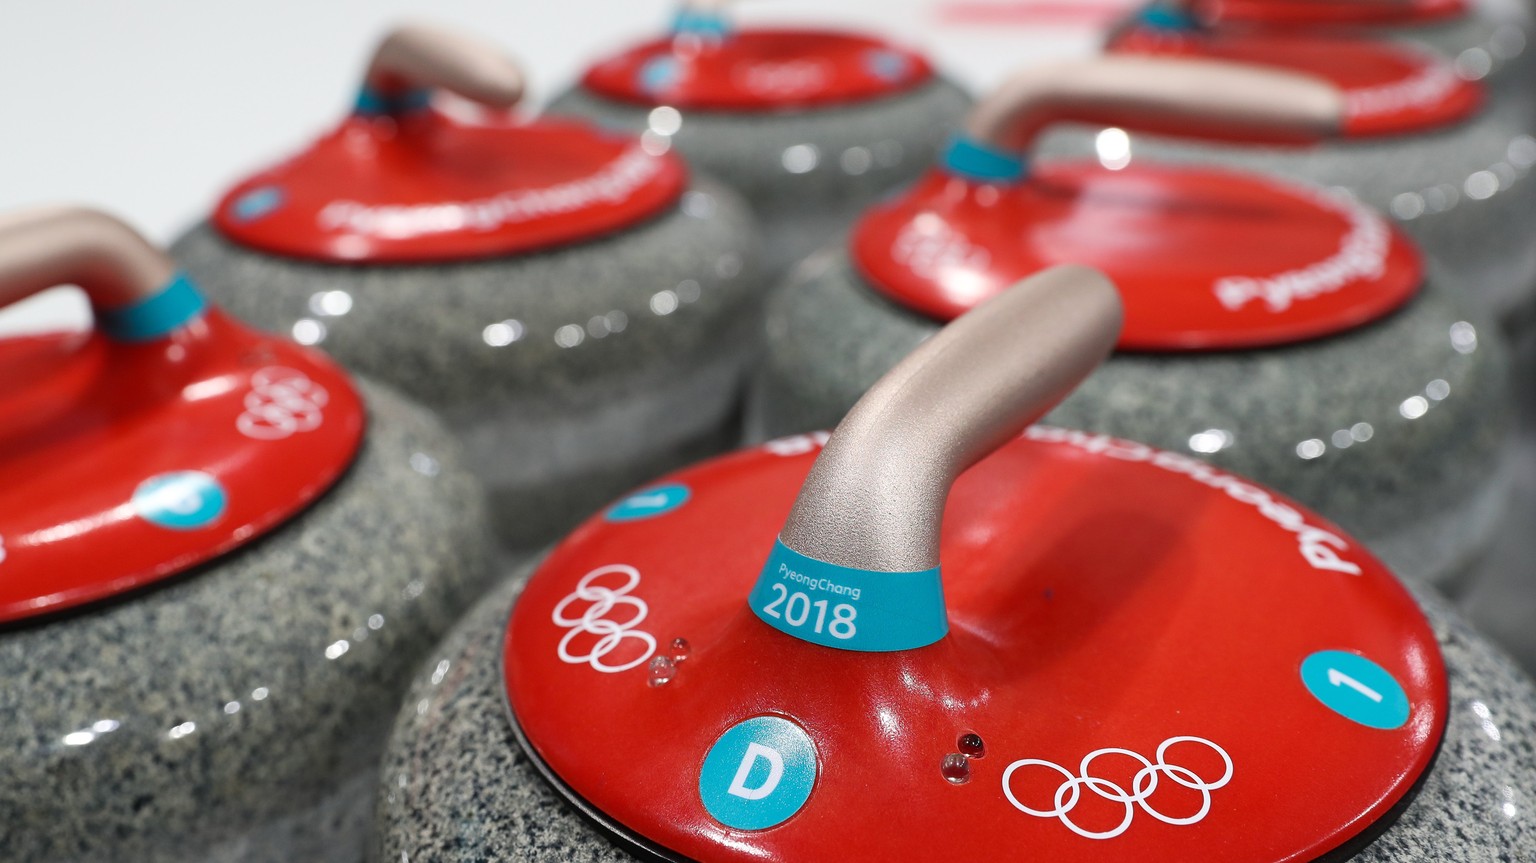 epa06497574 A detail of curling stones at the Gangneung Curling Centre during the PyeongChang 2018 Olympic Games, South Korea, 05 February 2018. EPA/Javier Etxezarreta